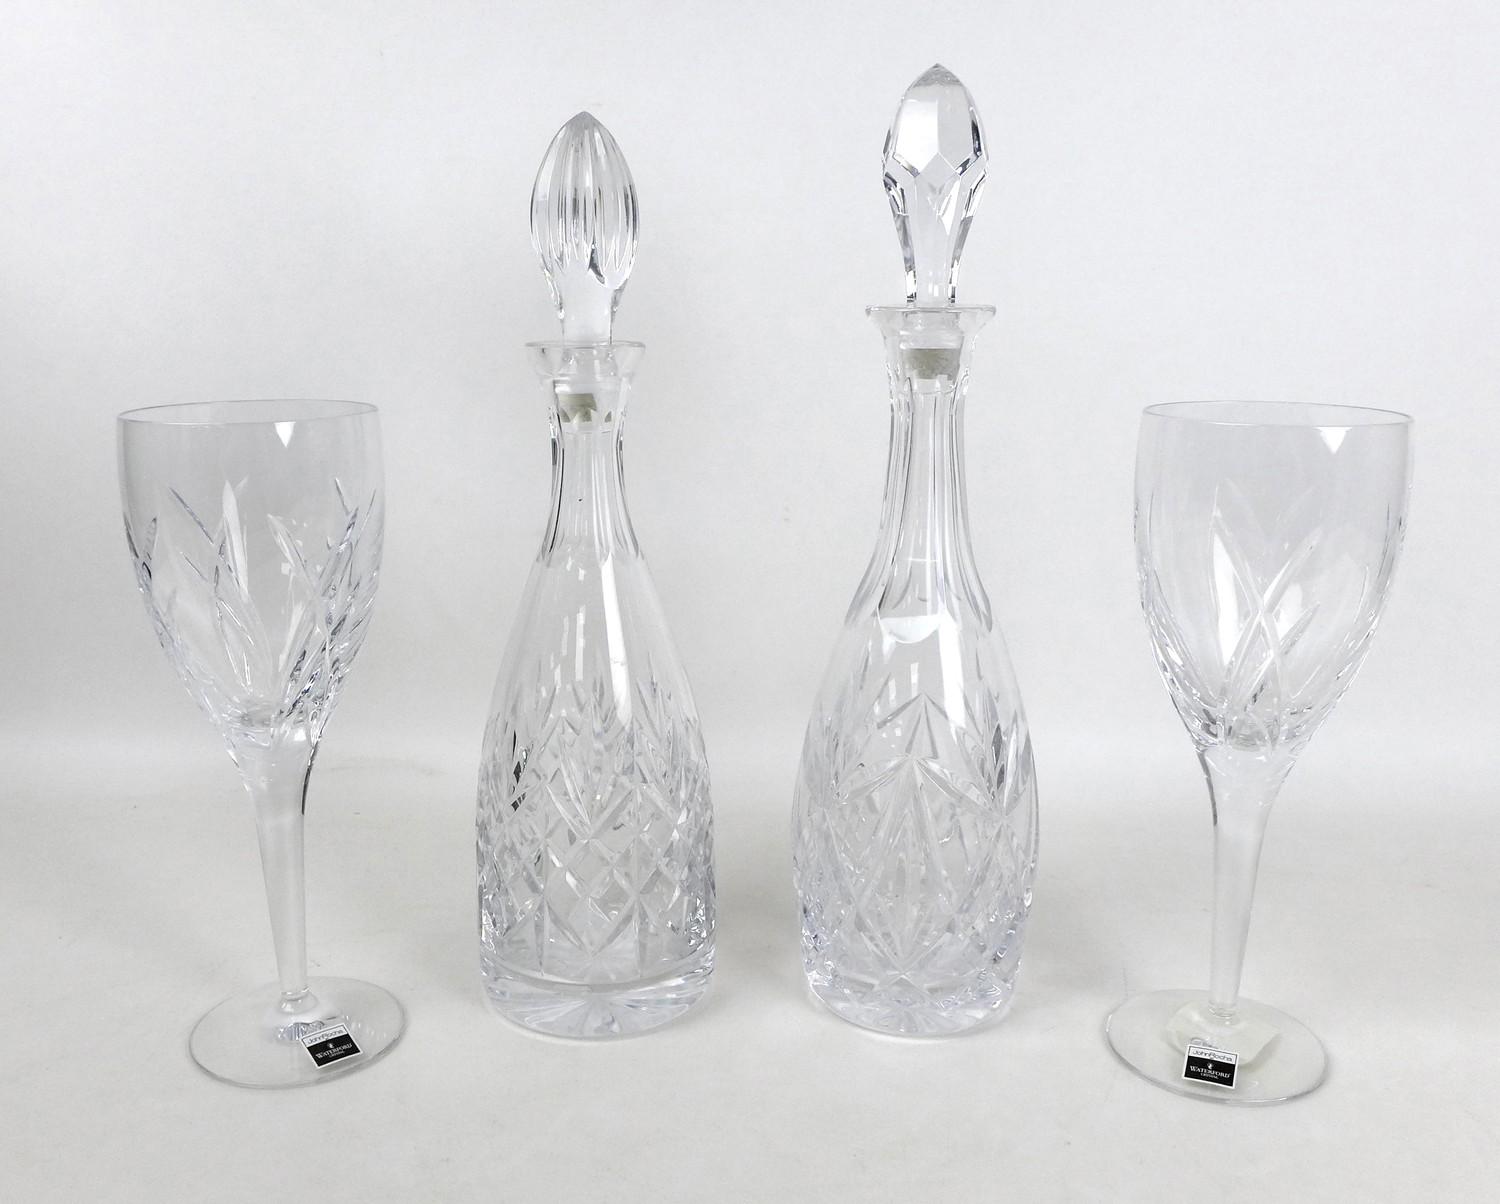 A pair of Waterford Signature Goblets, 10062SW, boxed as new, together with two cut glass